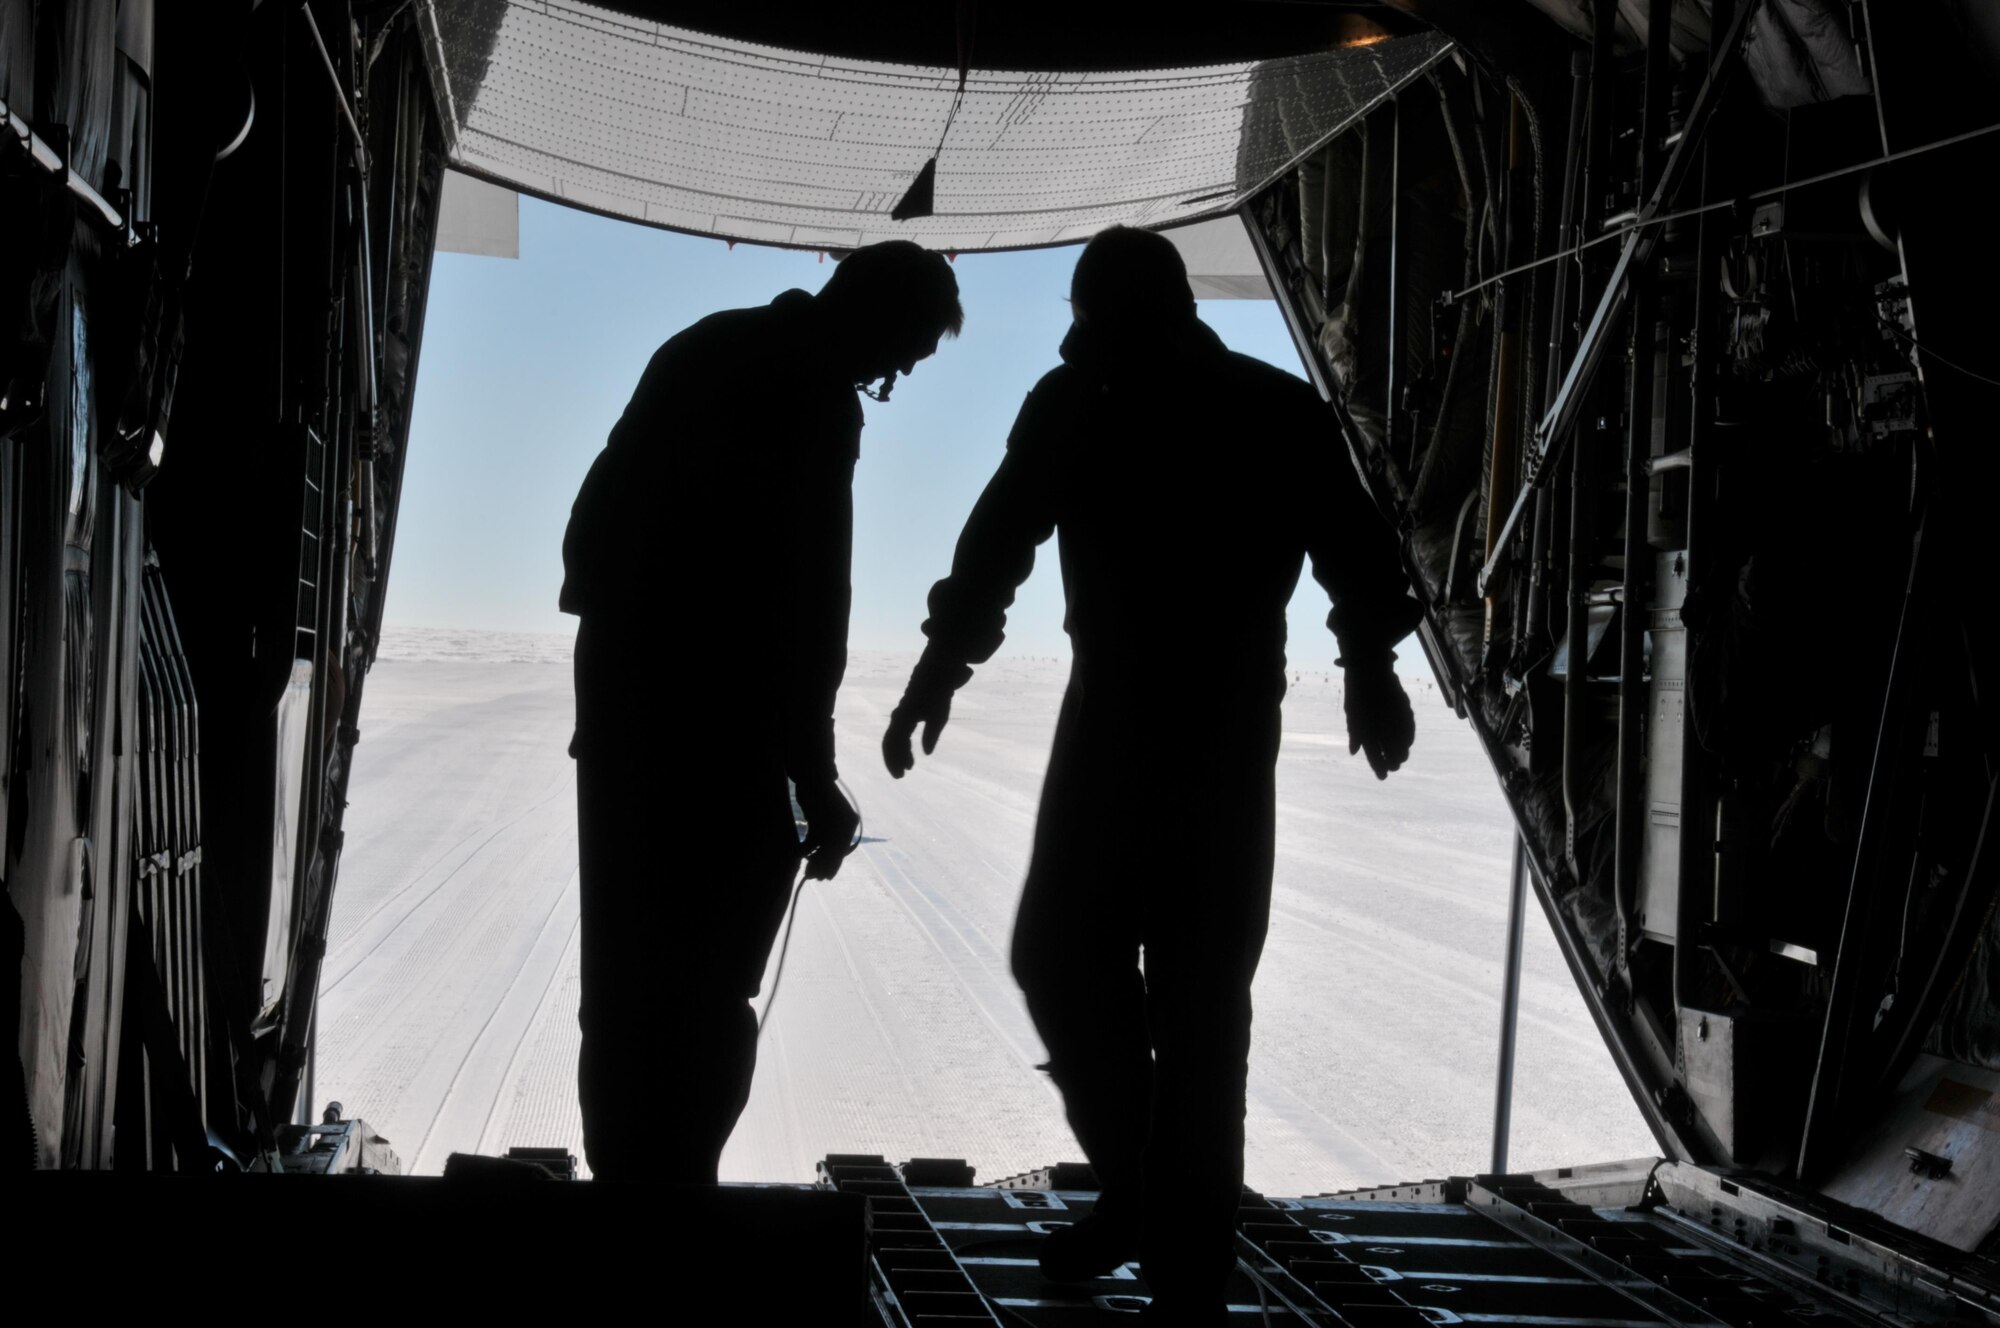 Master Sgt. Randy Powell (left) and Airman 1st Class Jason Vannostrand conduct a combat offload from an LC-130 aircraft here July 28, 2017. Powell is an instructor loadmaster with the 139th Airlift Squadron, and Vannostrand is a student loadmaster with the squadron. Raven Camp is used to train aircrews on LC-130 operations on snow runways. (U.S. Air National Guard photo by Master Sgt. Catharine Schmidt/Released)